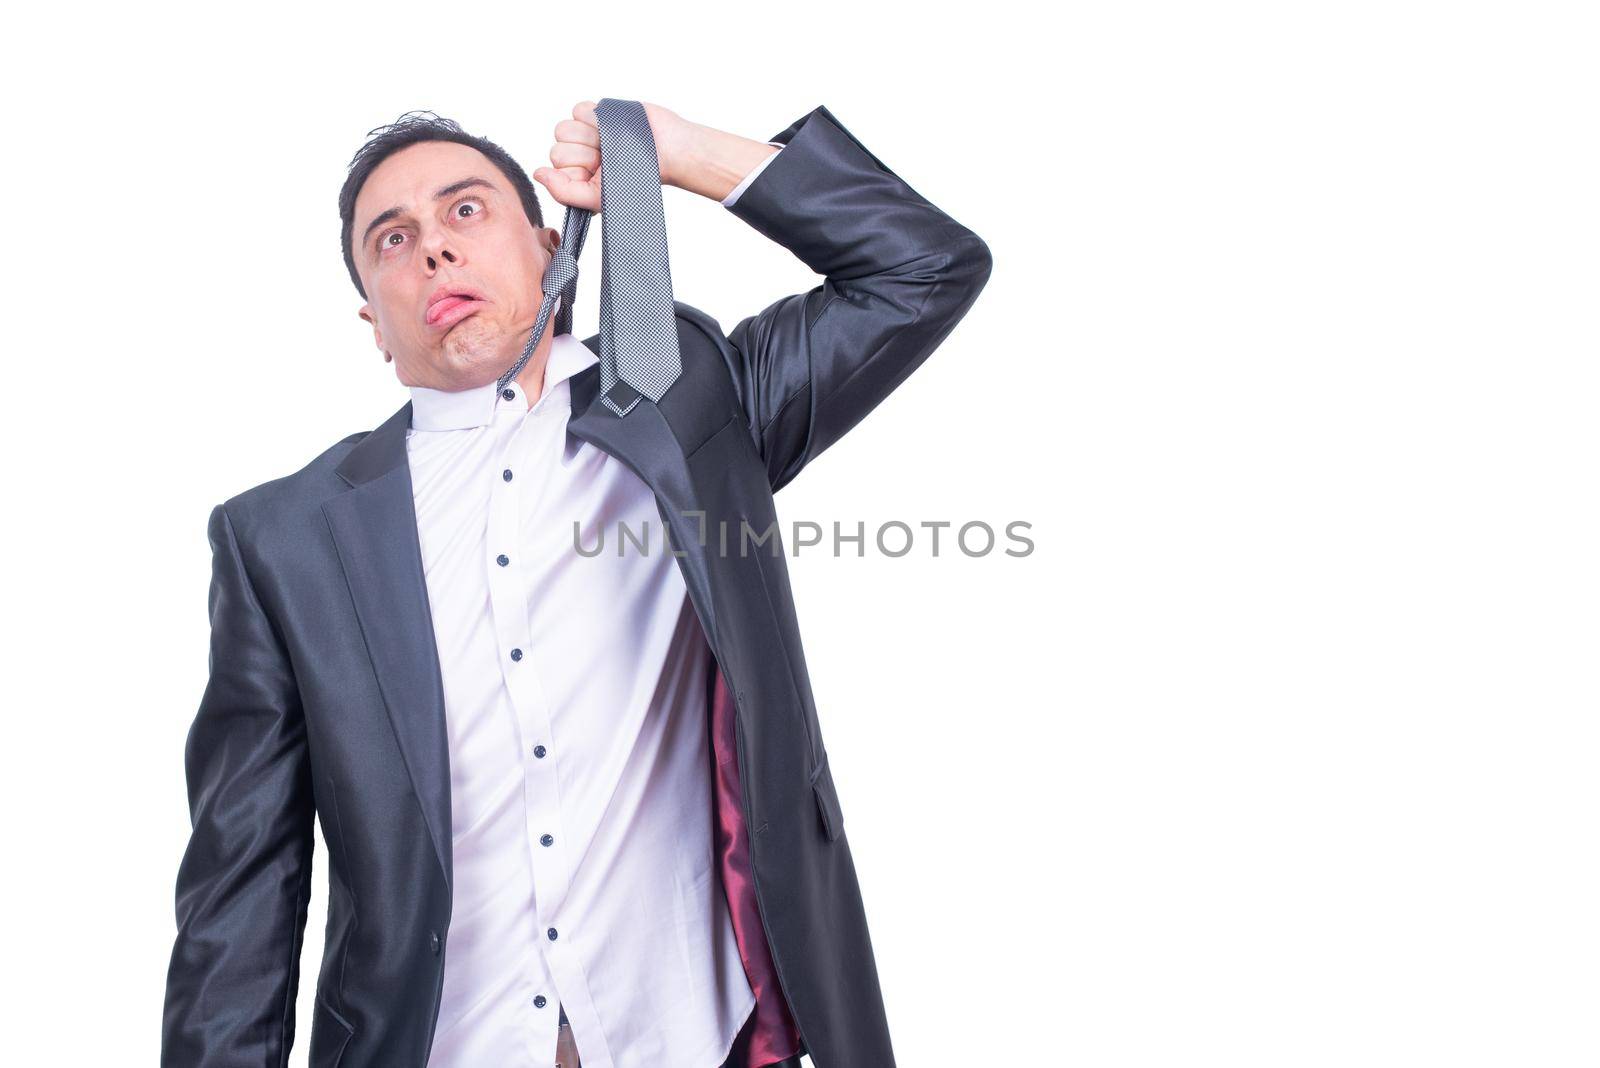 Exhausted male manager in suit with tongue out hanging himself on tie while standing isolated on white background in light studio